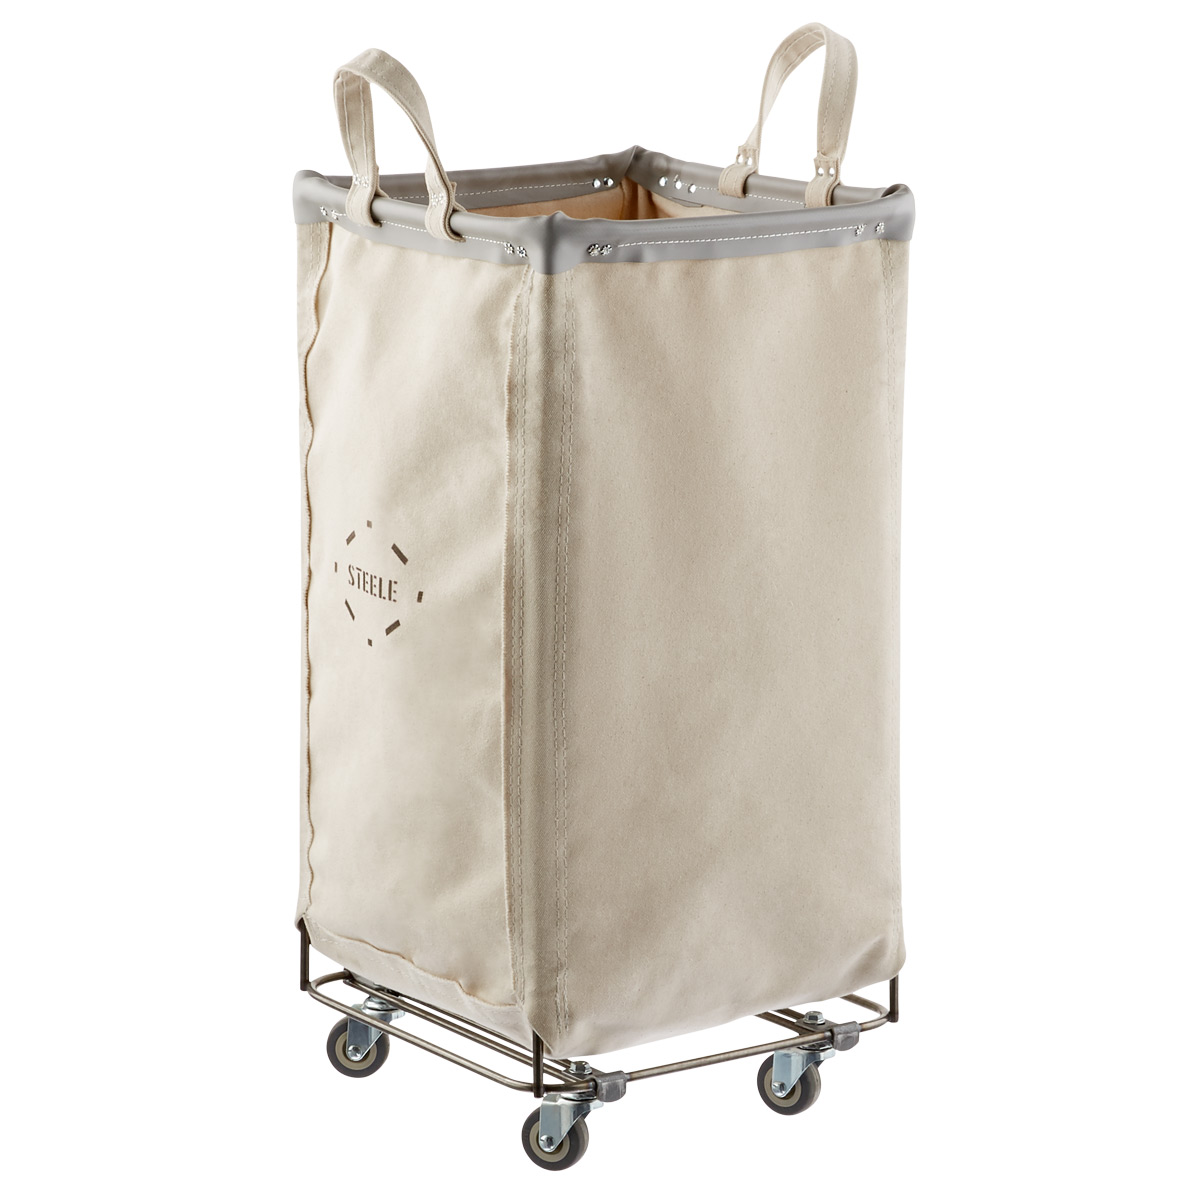 Steele Canvas Natural & Grey Squared Sorting Hamper | The Container Store